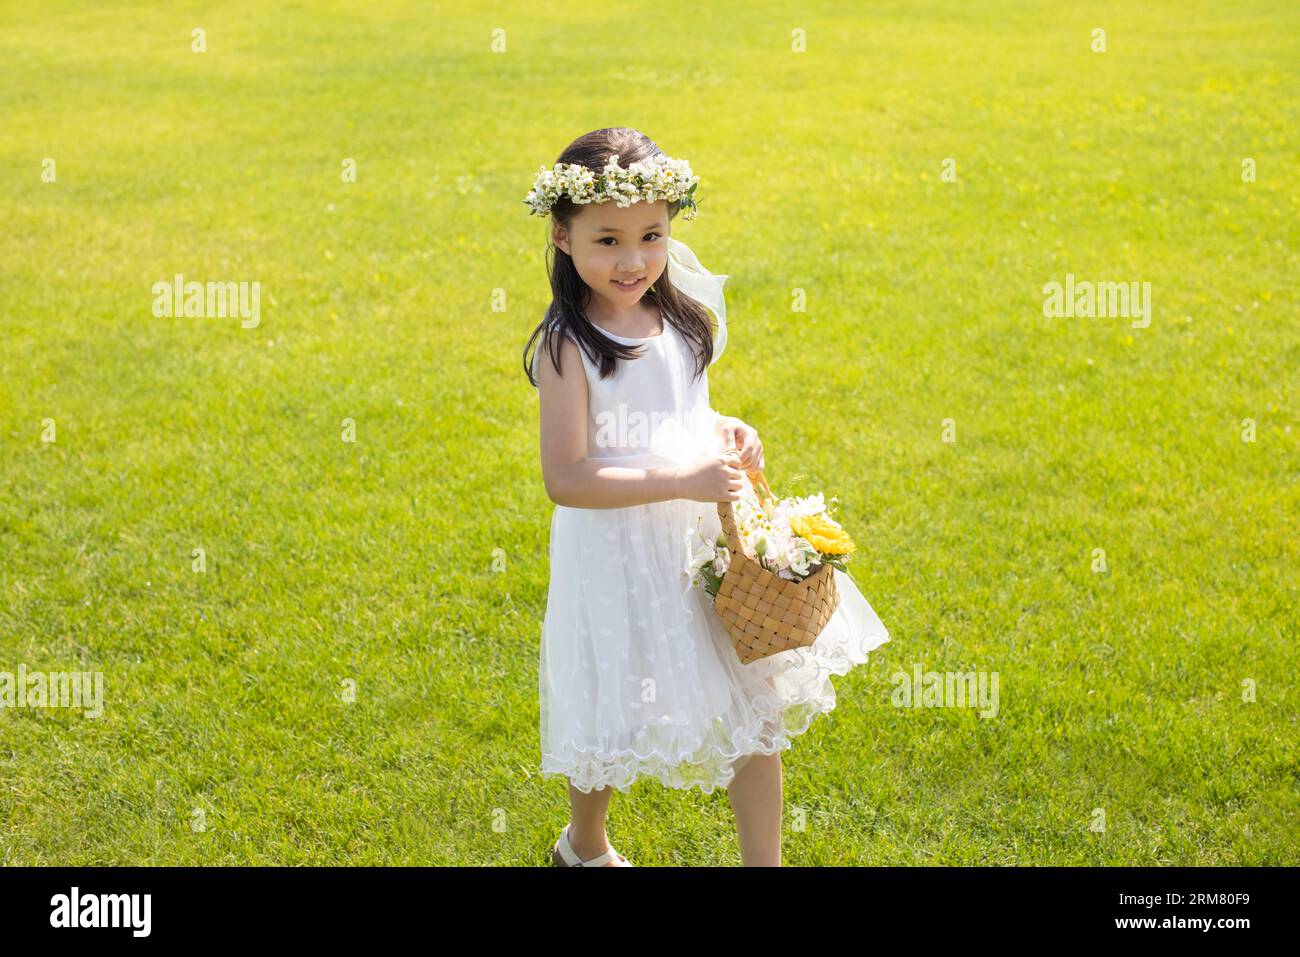 Cute flower girl playing on the grass Stock Photo